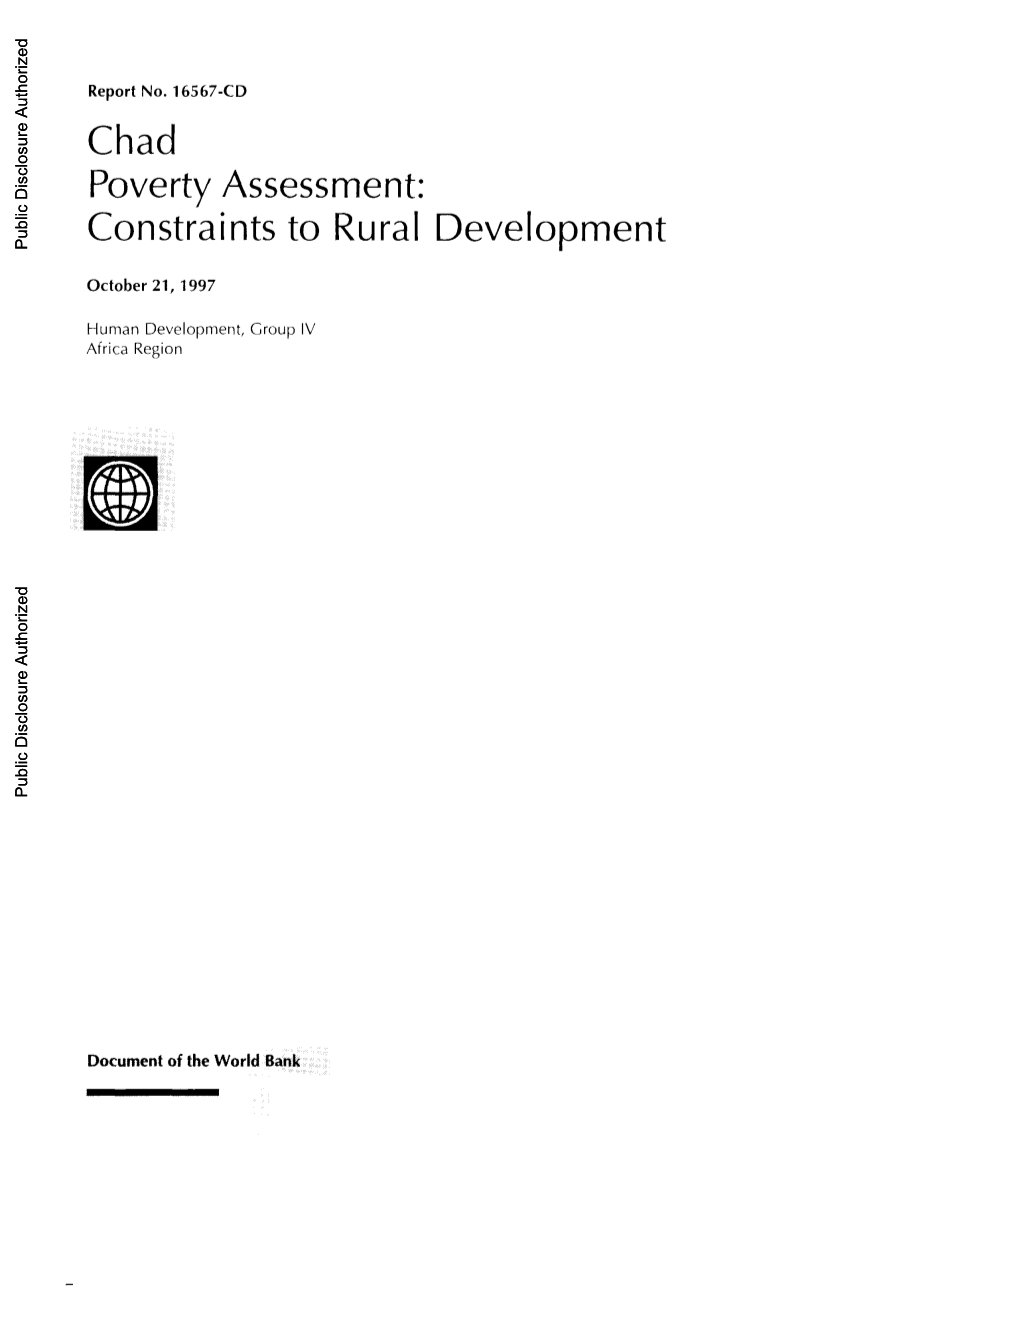 Chad Poverty Assessment: Constraints to Rural Development